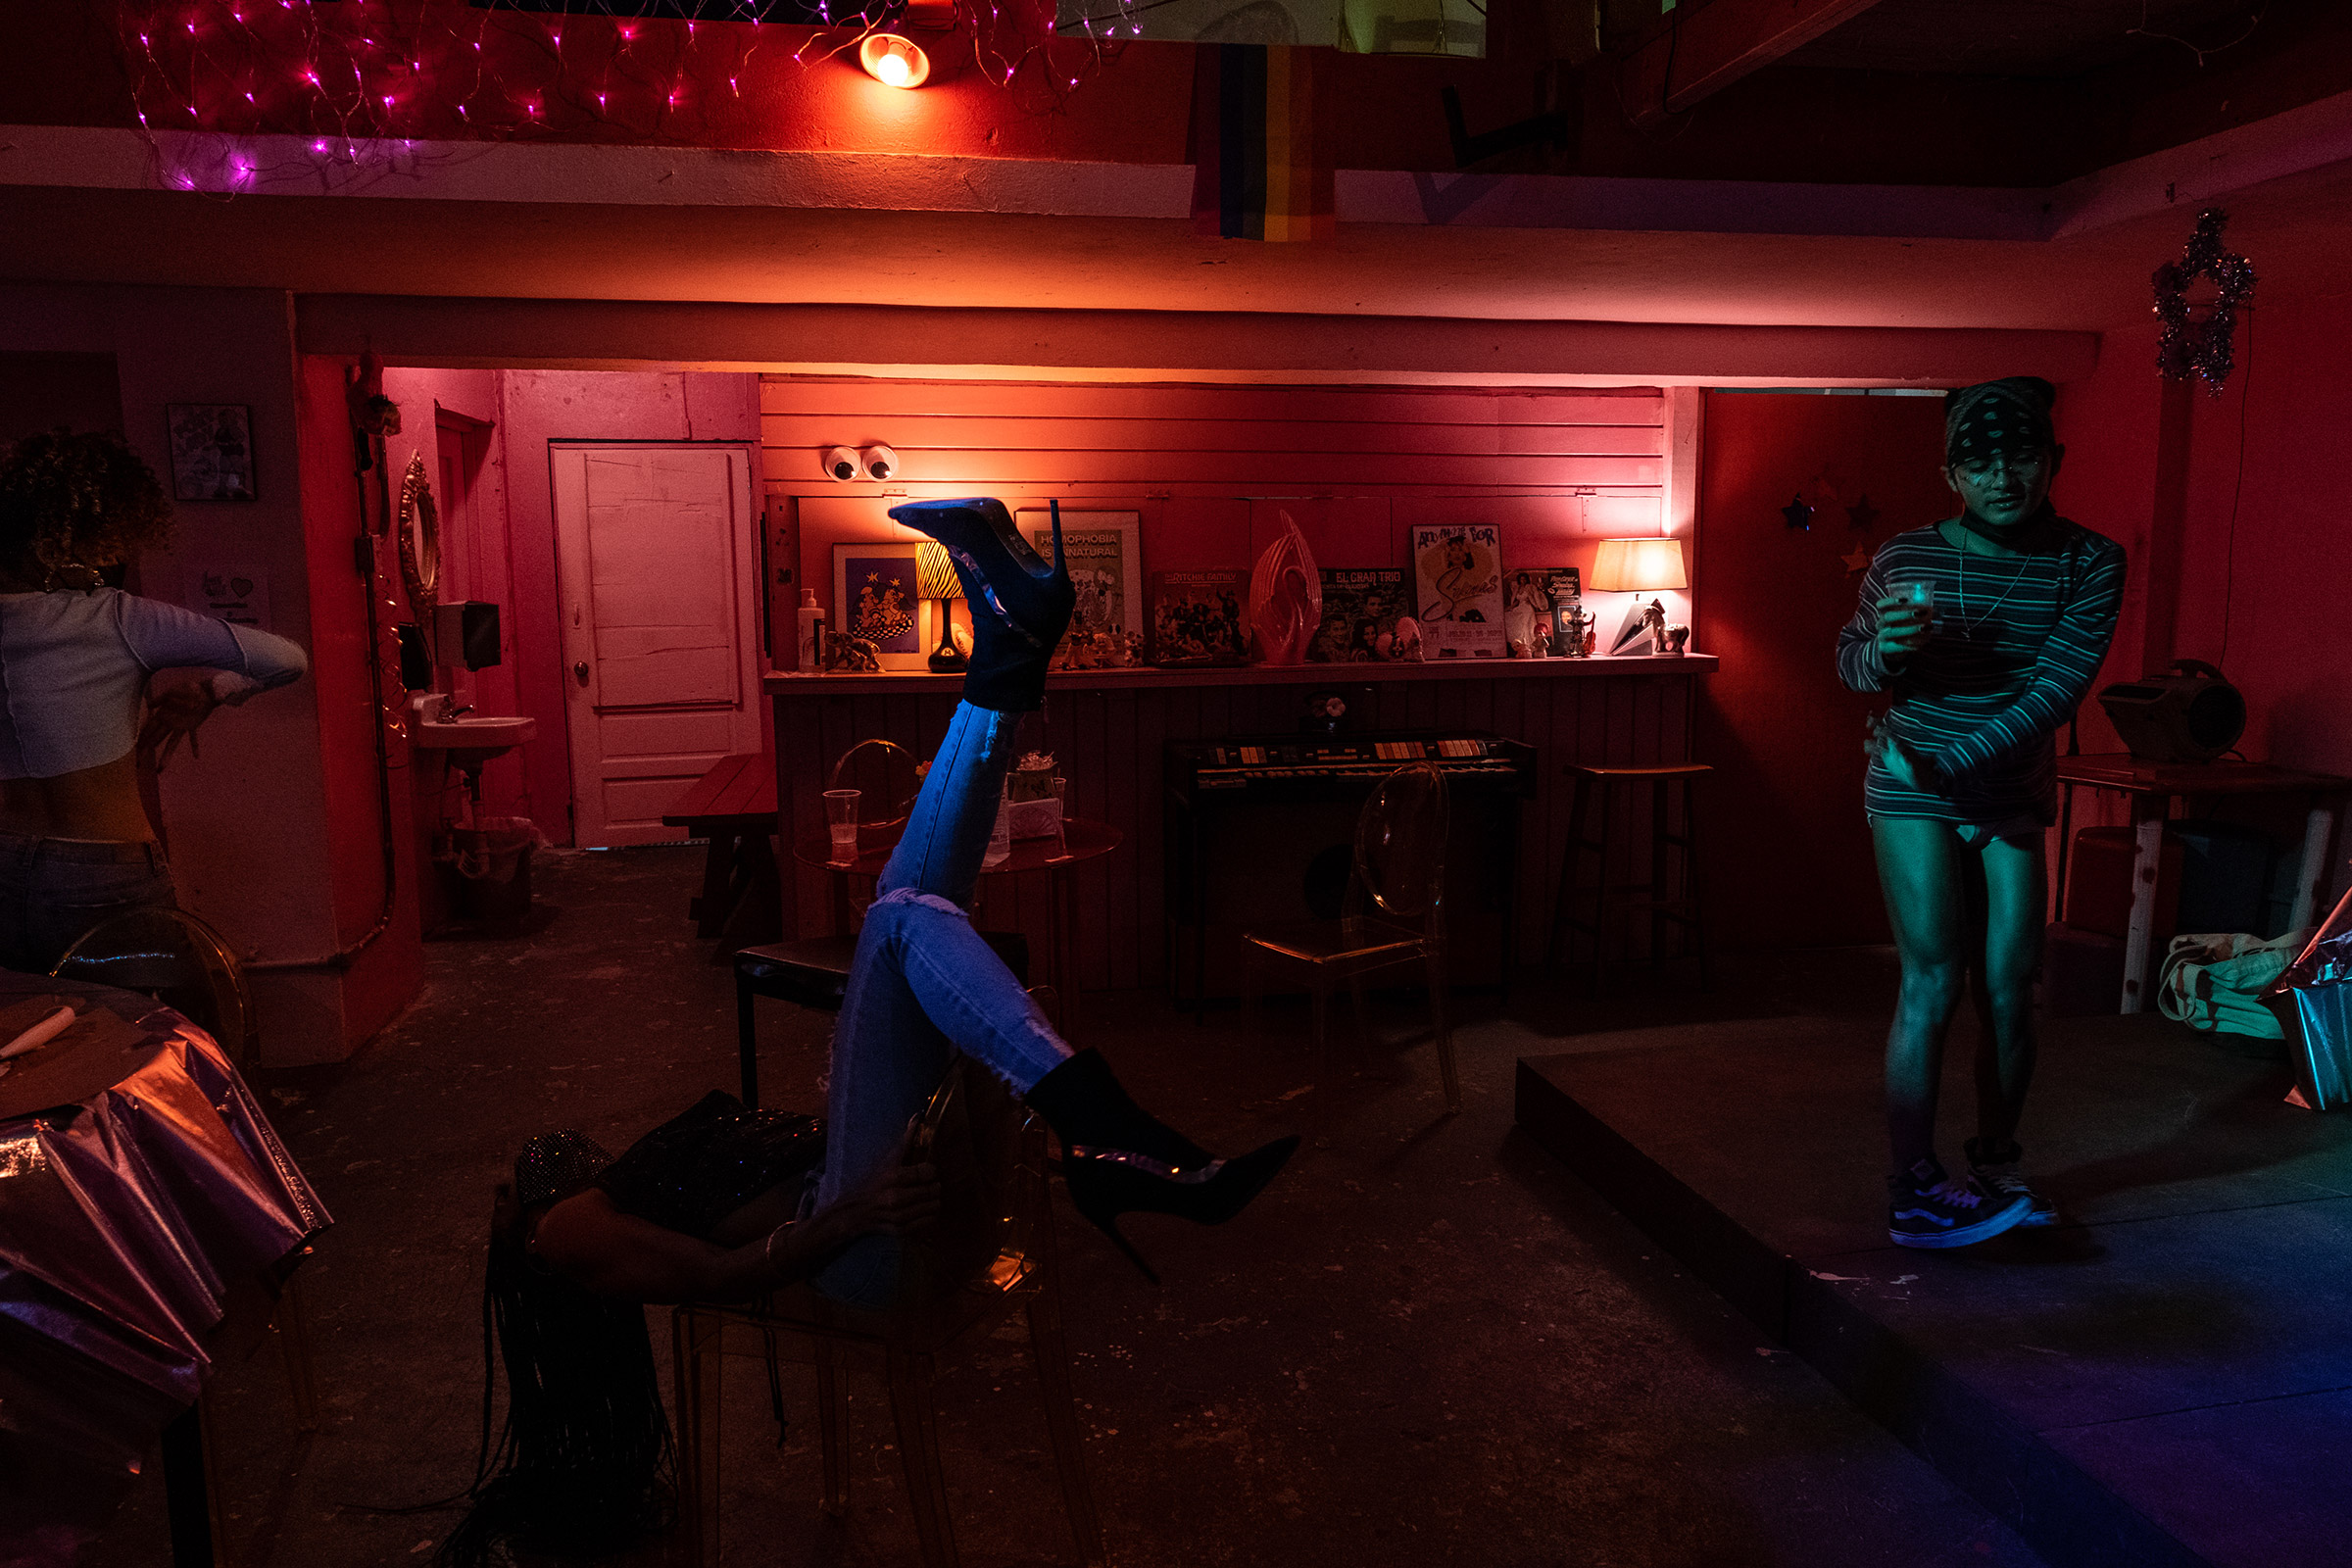 Left to right: Coco, Teresa, and Beibijavi dance during the House of Grace holiday dinner at Loverbar in Rio Piedras, San Juan, Puerto Rico. (Gabriella N. Báez—Magnum Foundation)